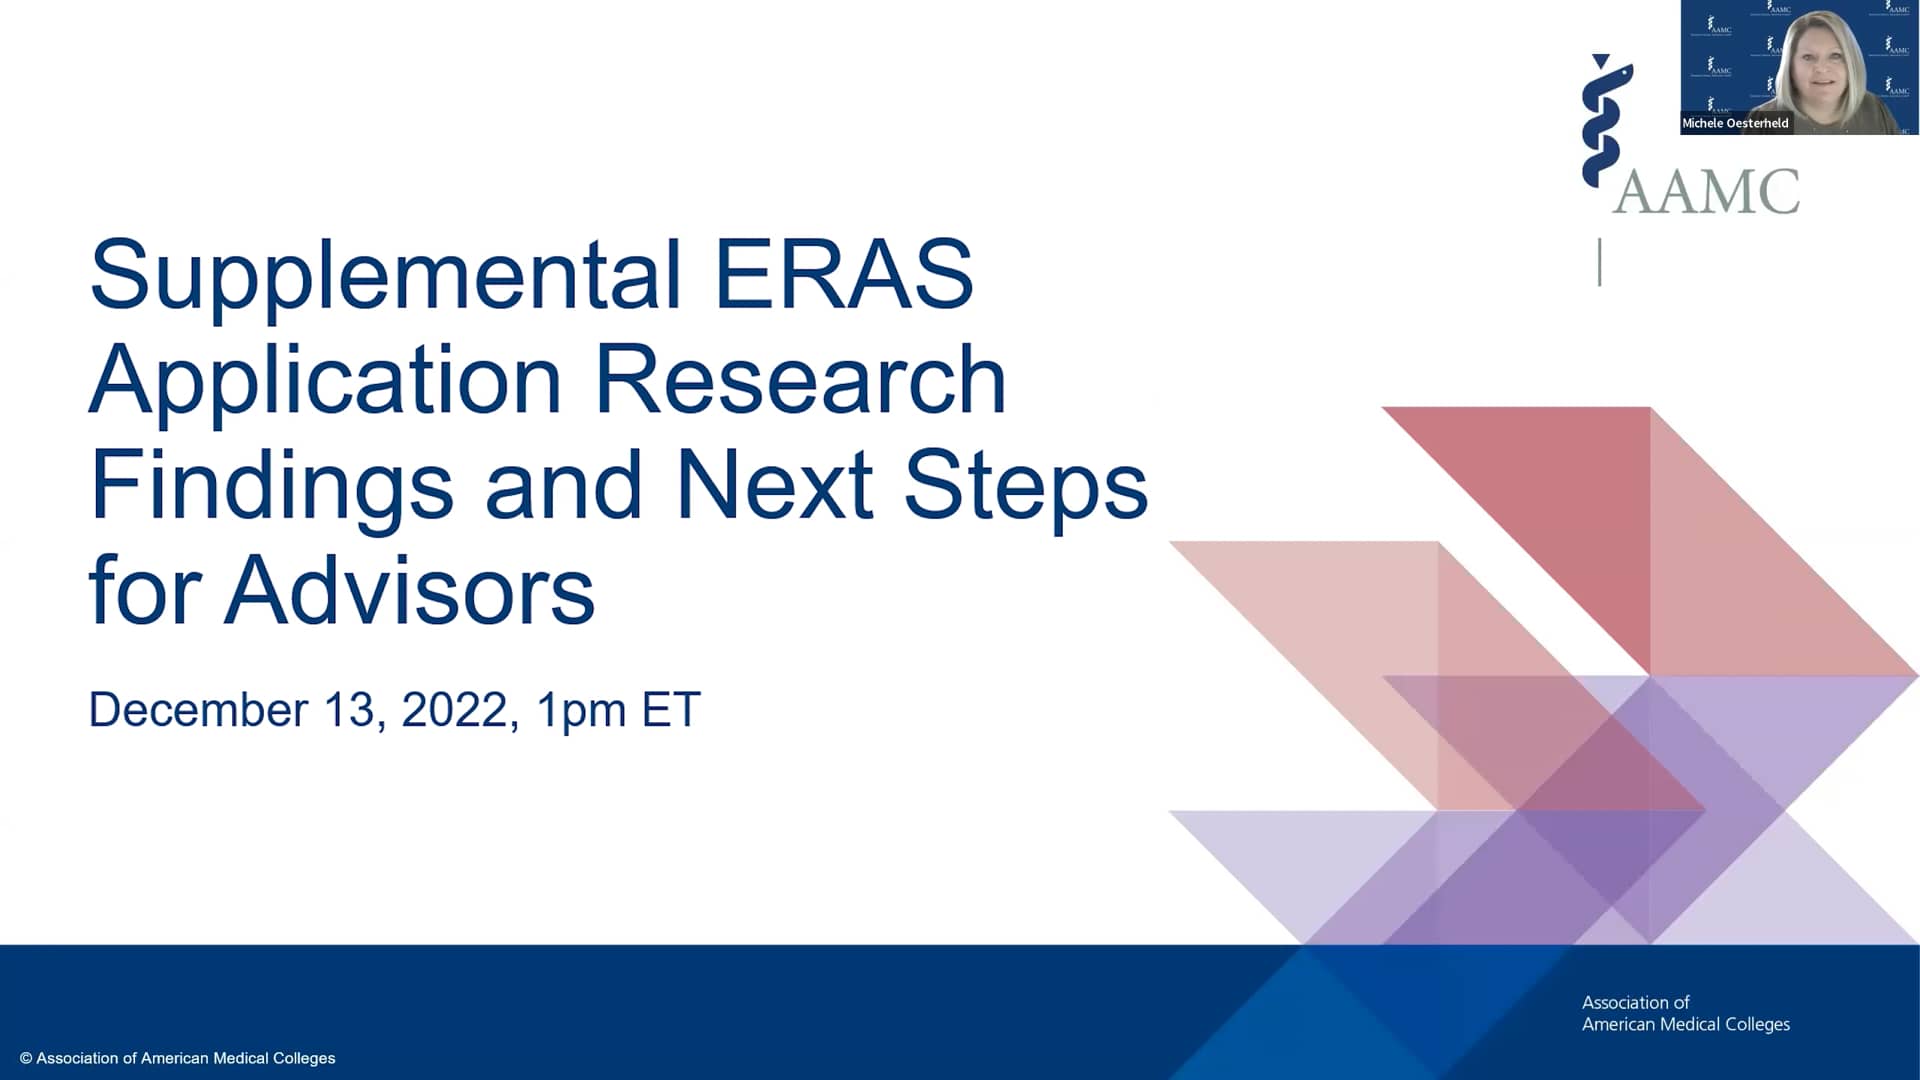 Supplemental ERAS Application Research Findings and Next Steps for the